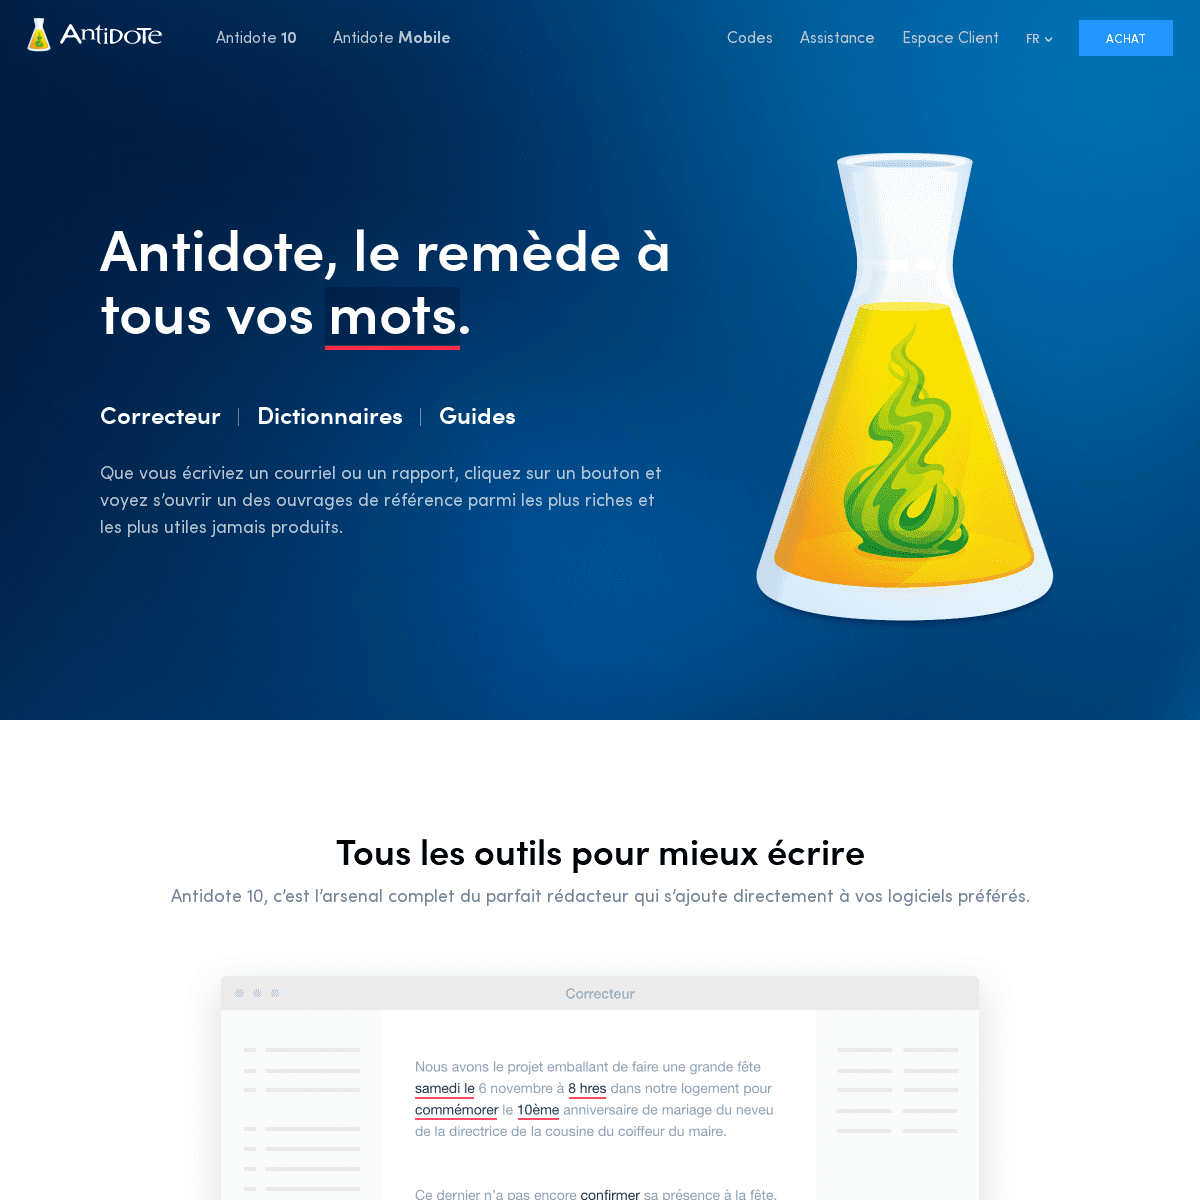 A complete backup of antidote.info